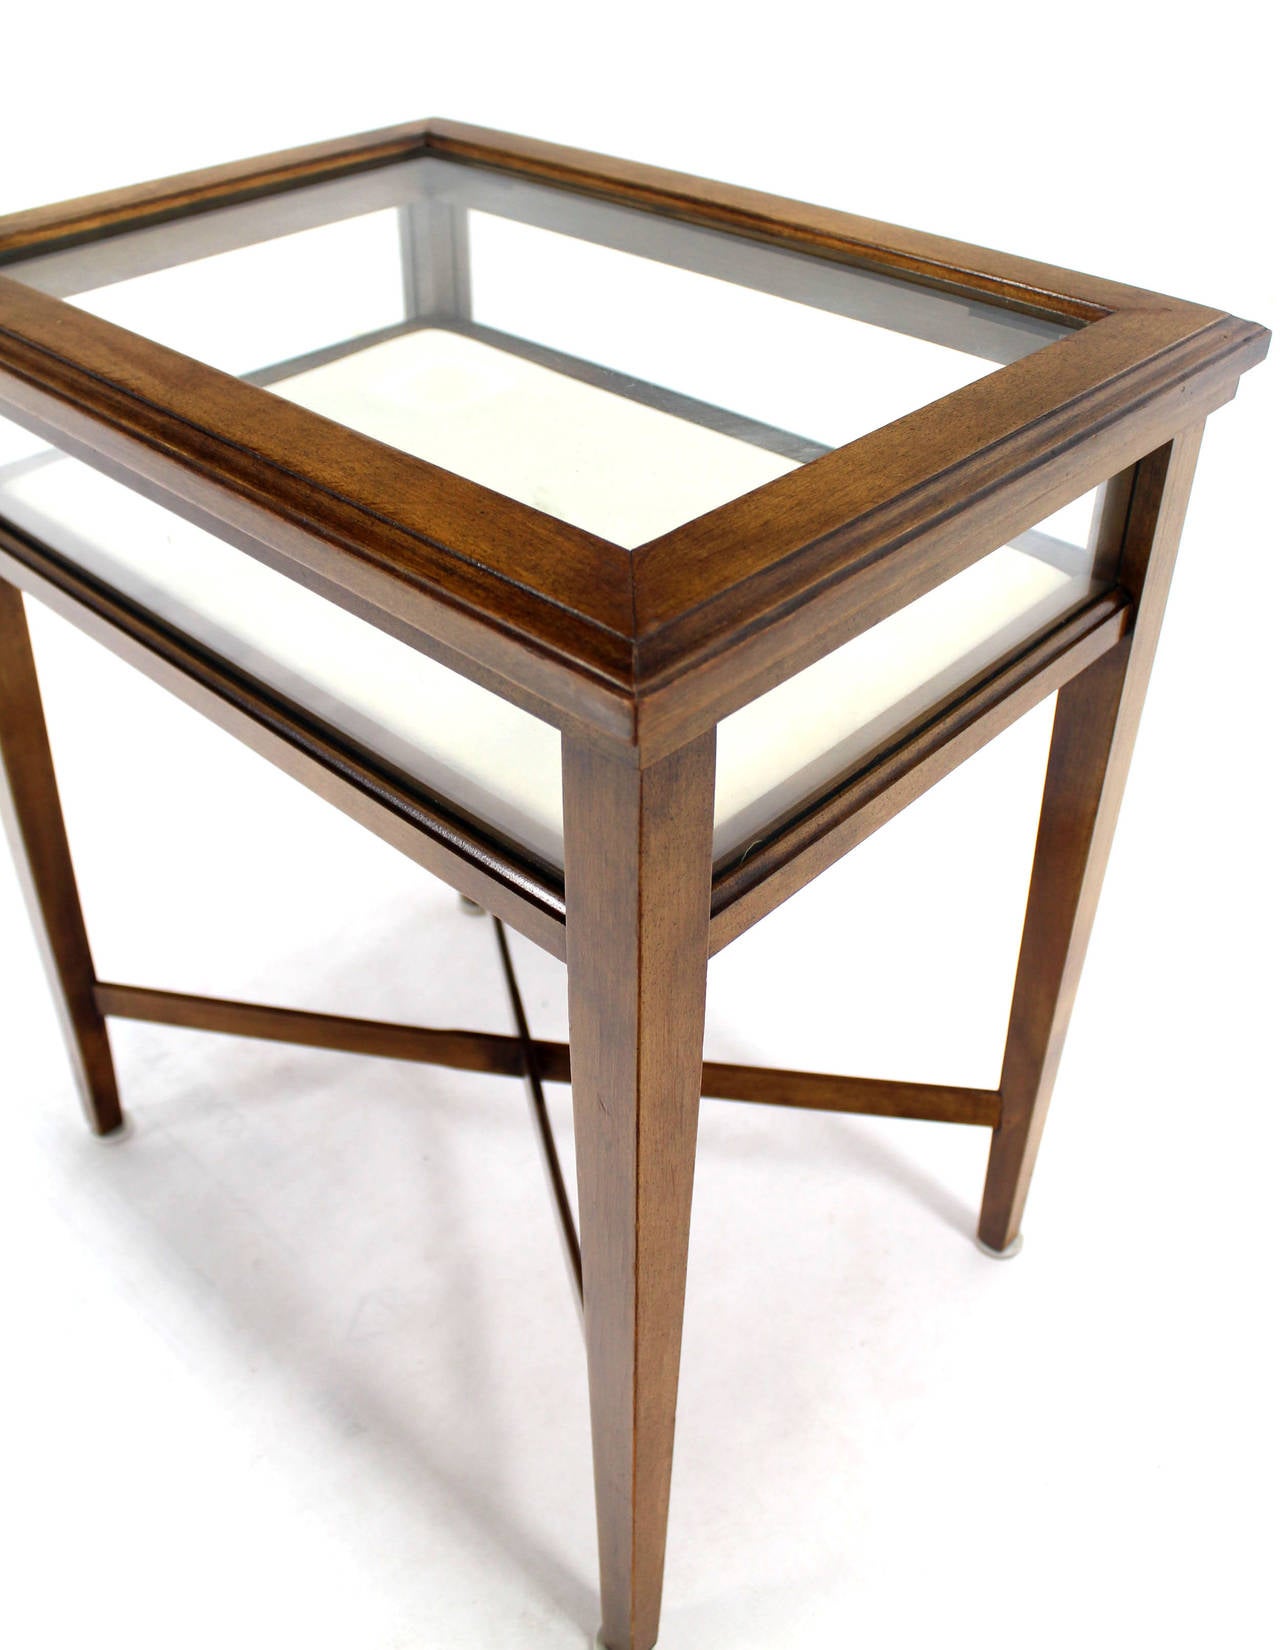 Mid-century modern design pair of lift top end tables vitrines